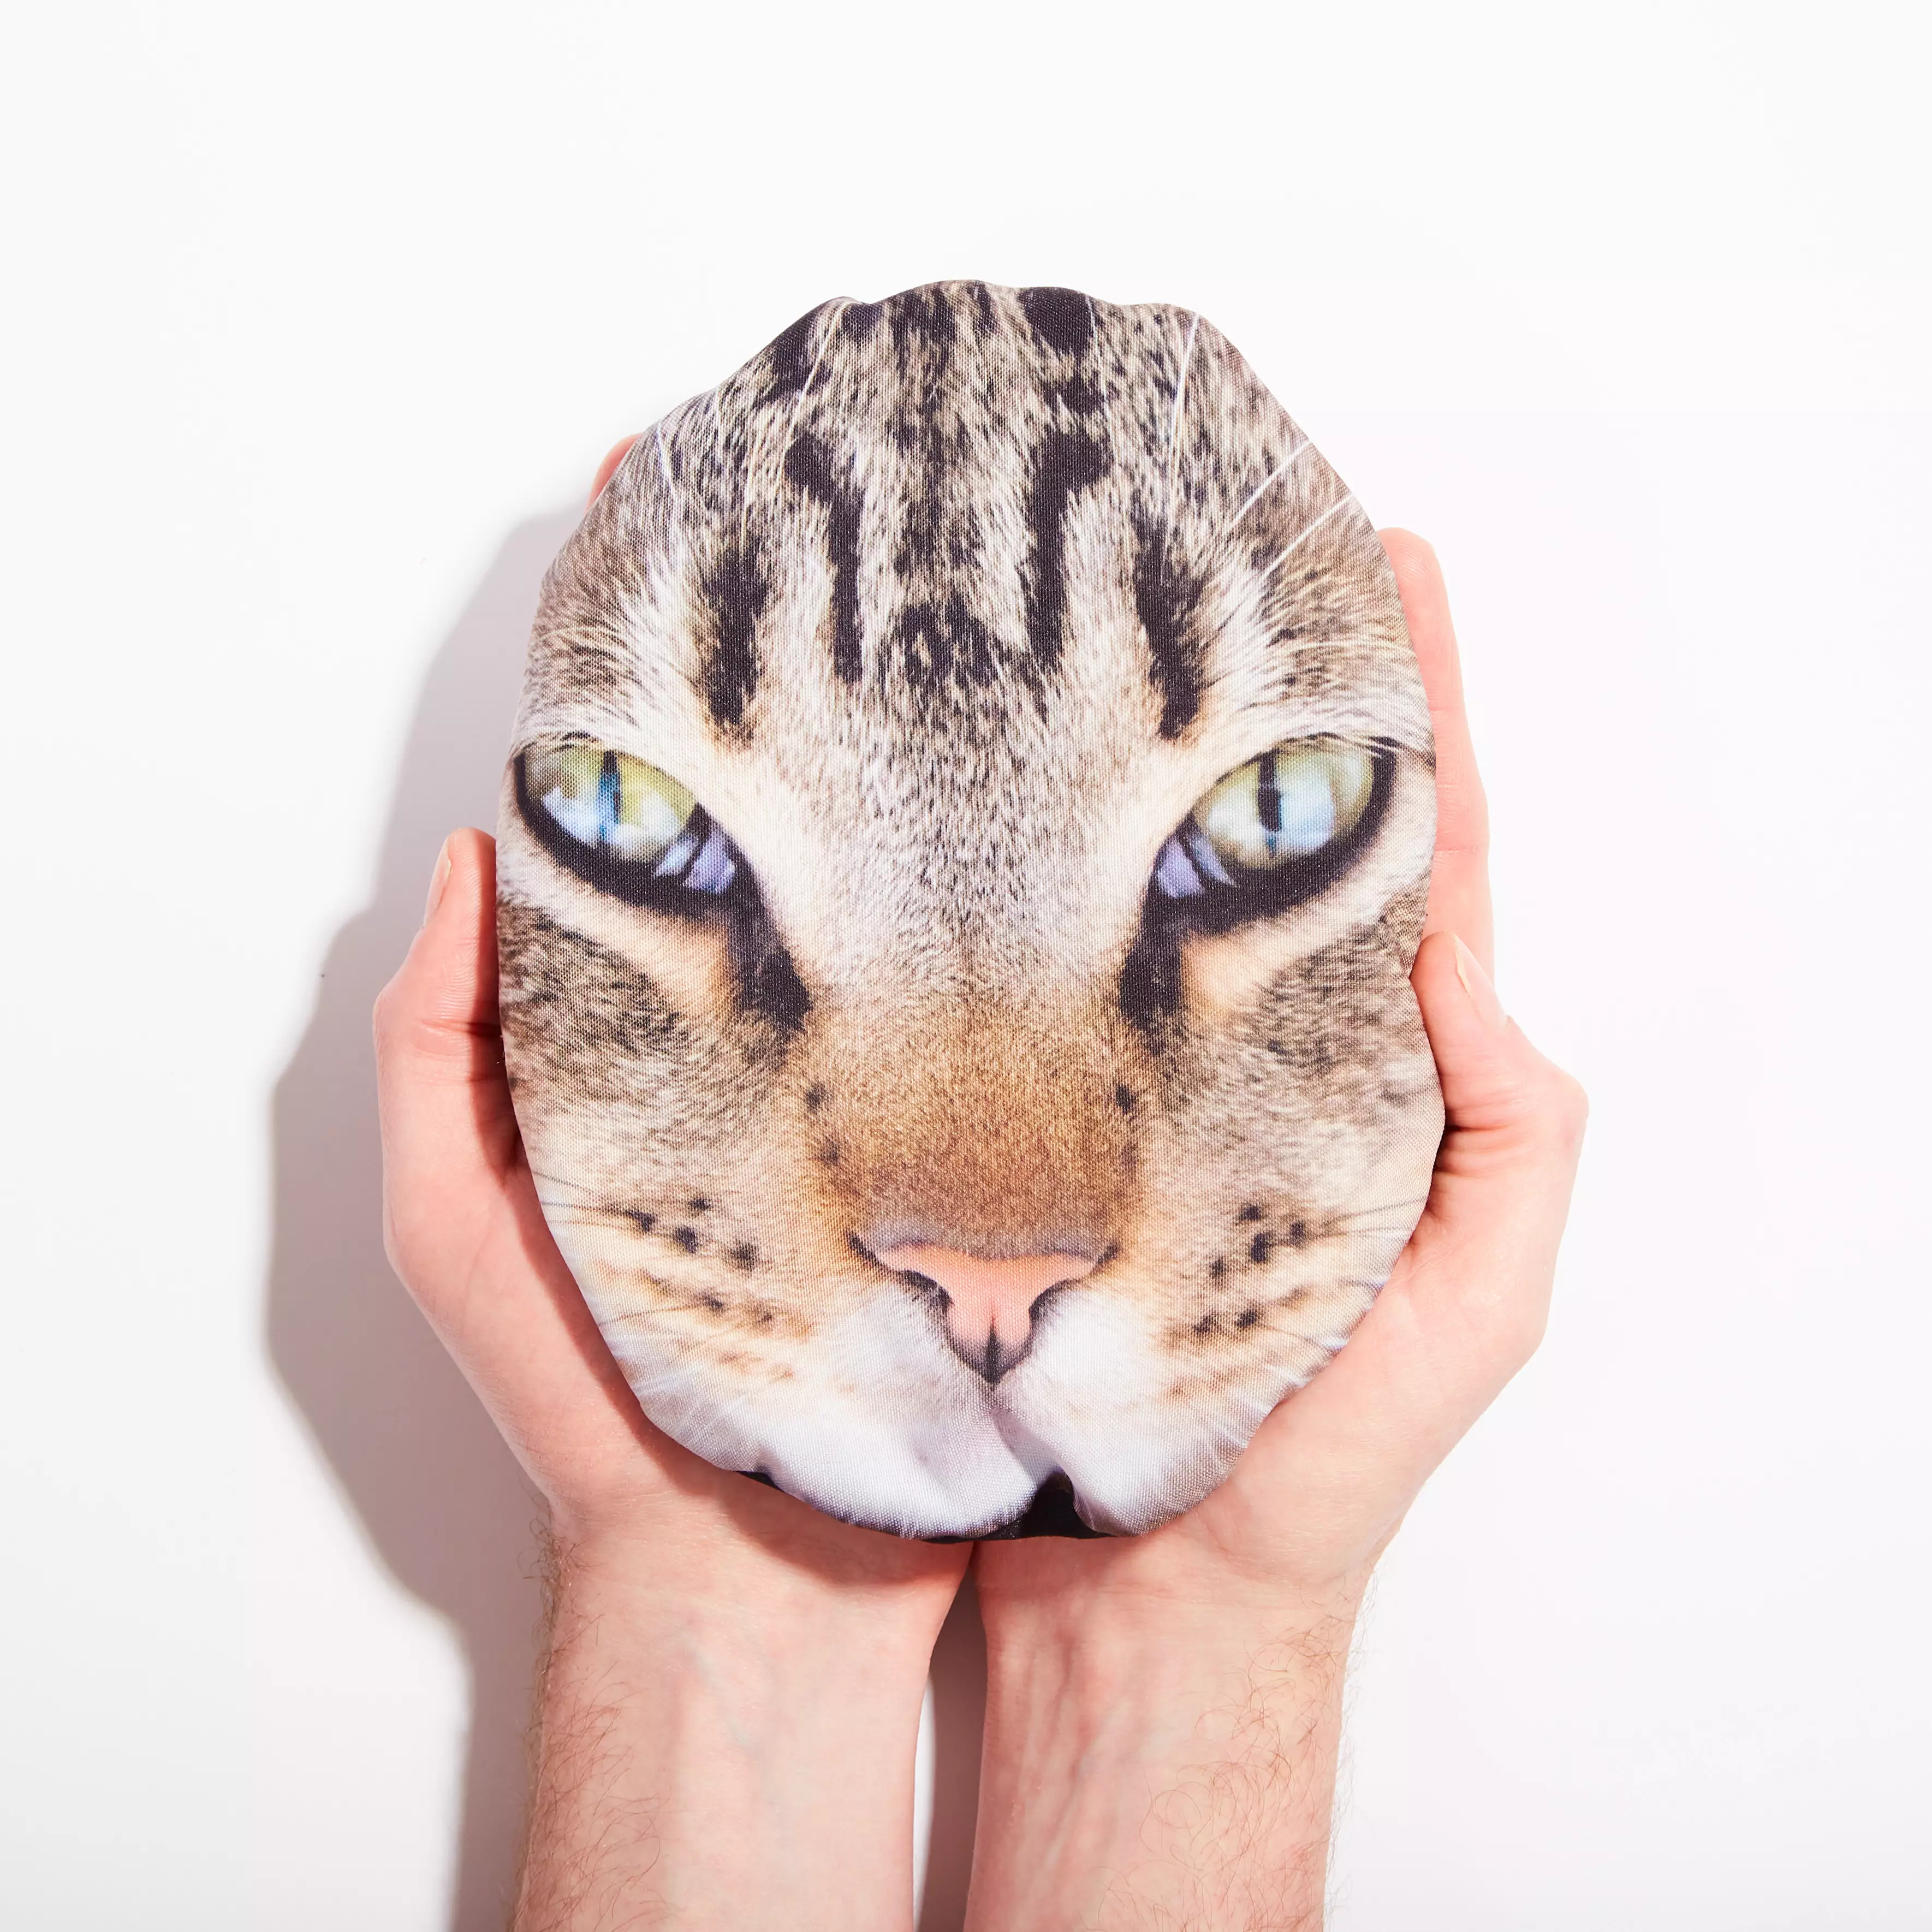 If you're more of a cat person, you could choose your cat's face instead. (